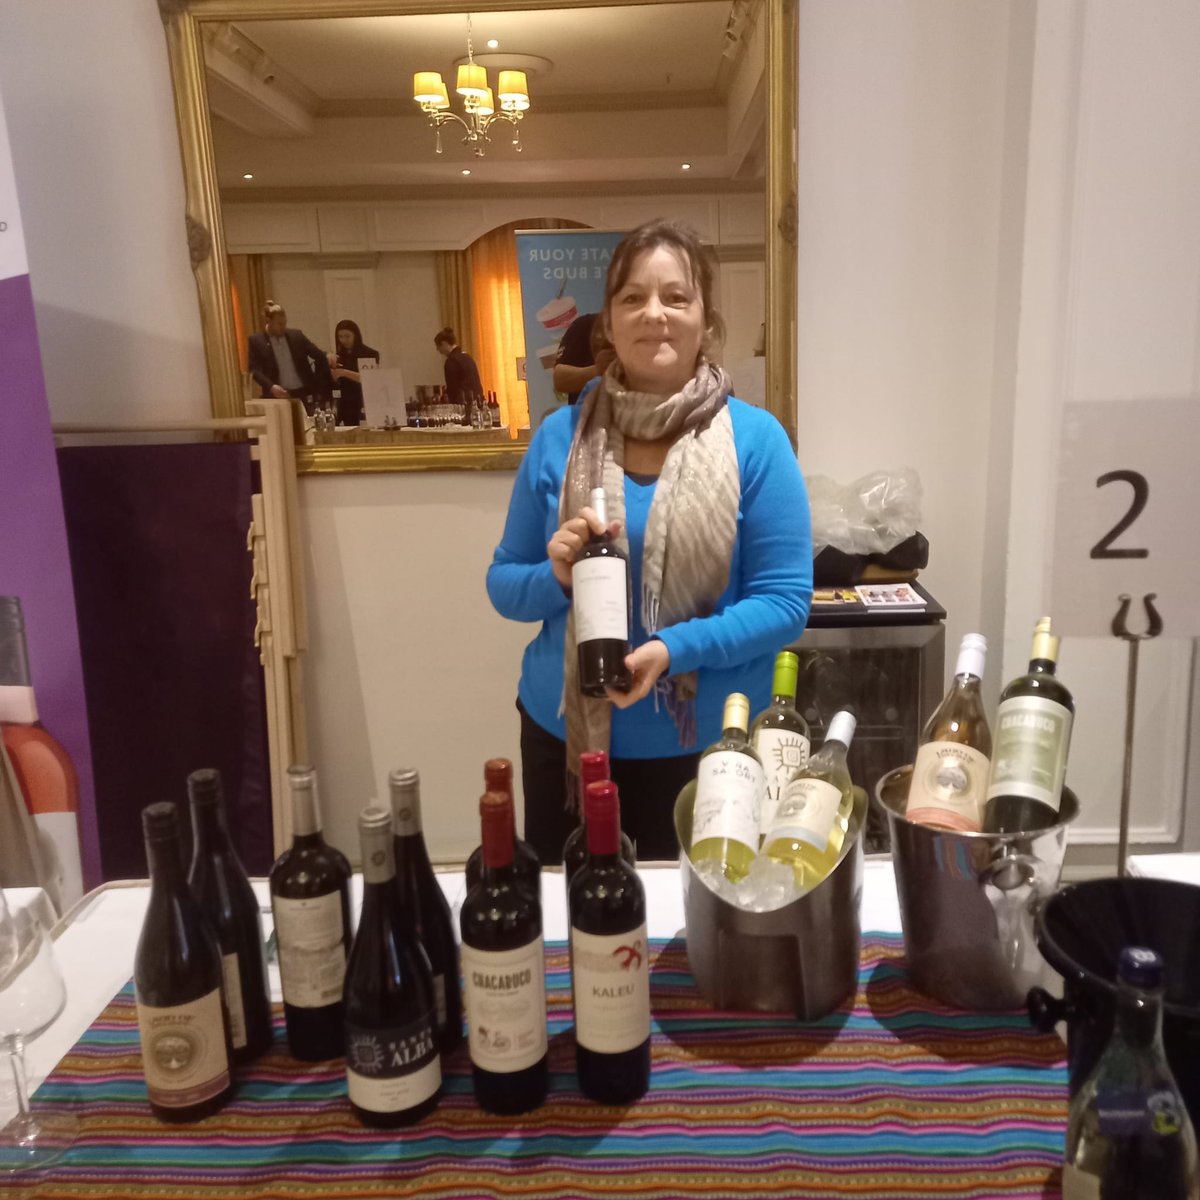 ⛴️ Condor on Tour!⛴️

Busy day in the Channel Islands with @libbrewingco 👏 

Thanks to everyone who dropped by to taste and talk. Lovely to see everyone!

#condorontour #winewednesday #condorwines #winetasting #winesofargentina #winesofchile #winesofuruguay #southamericanwines